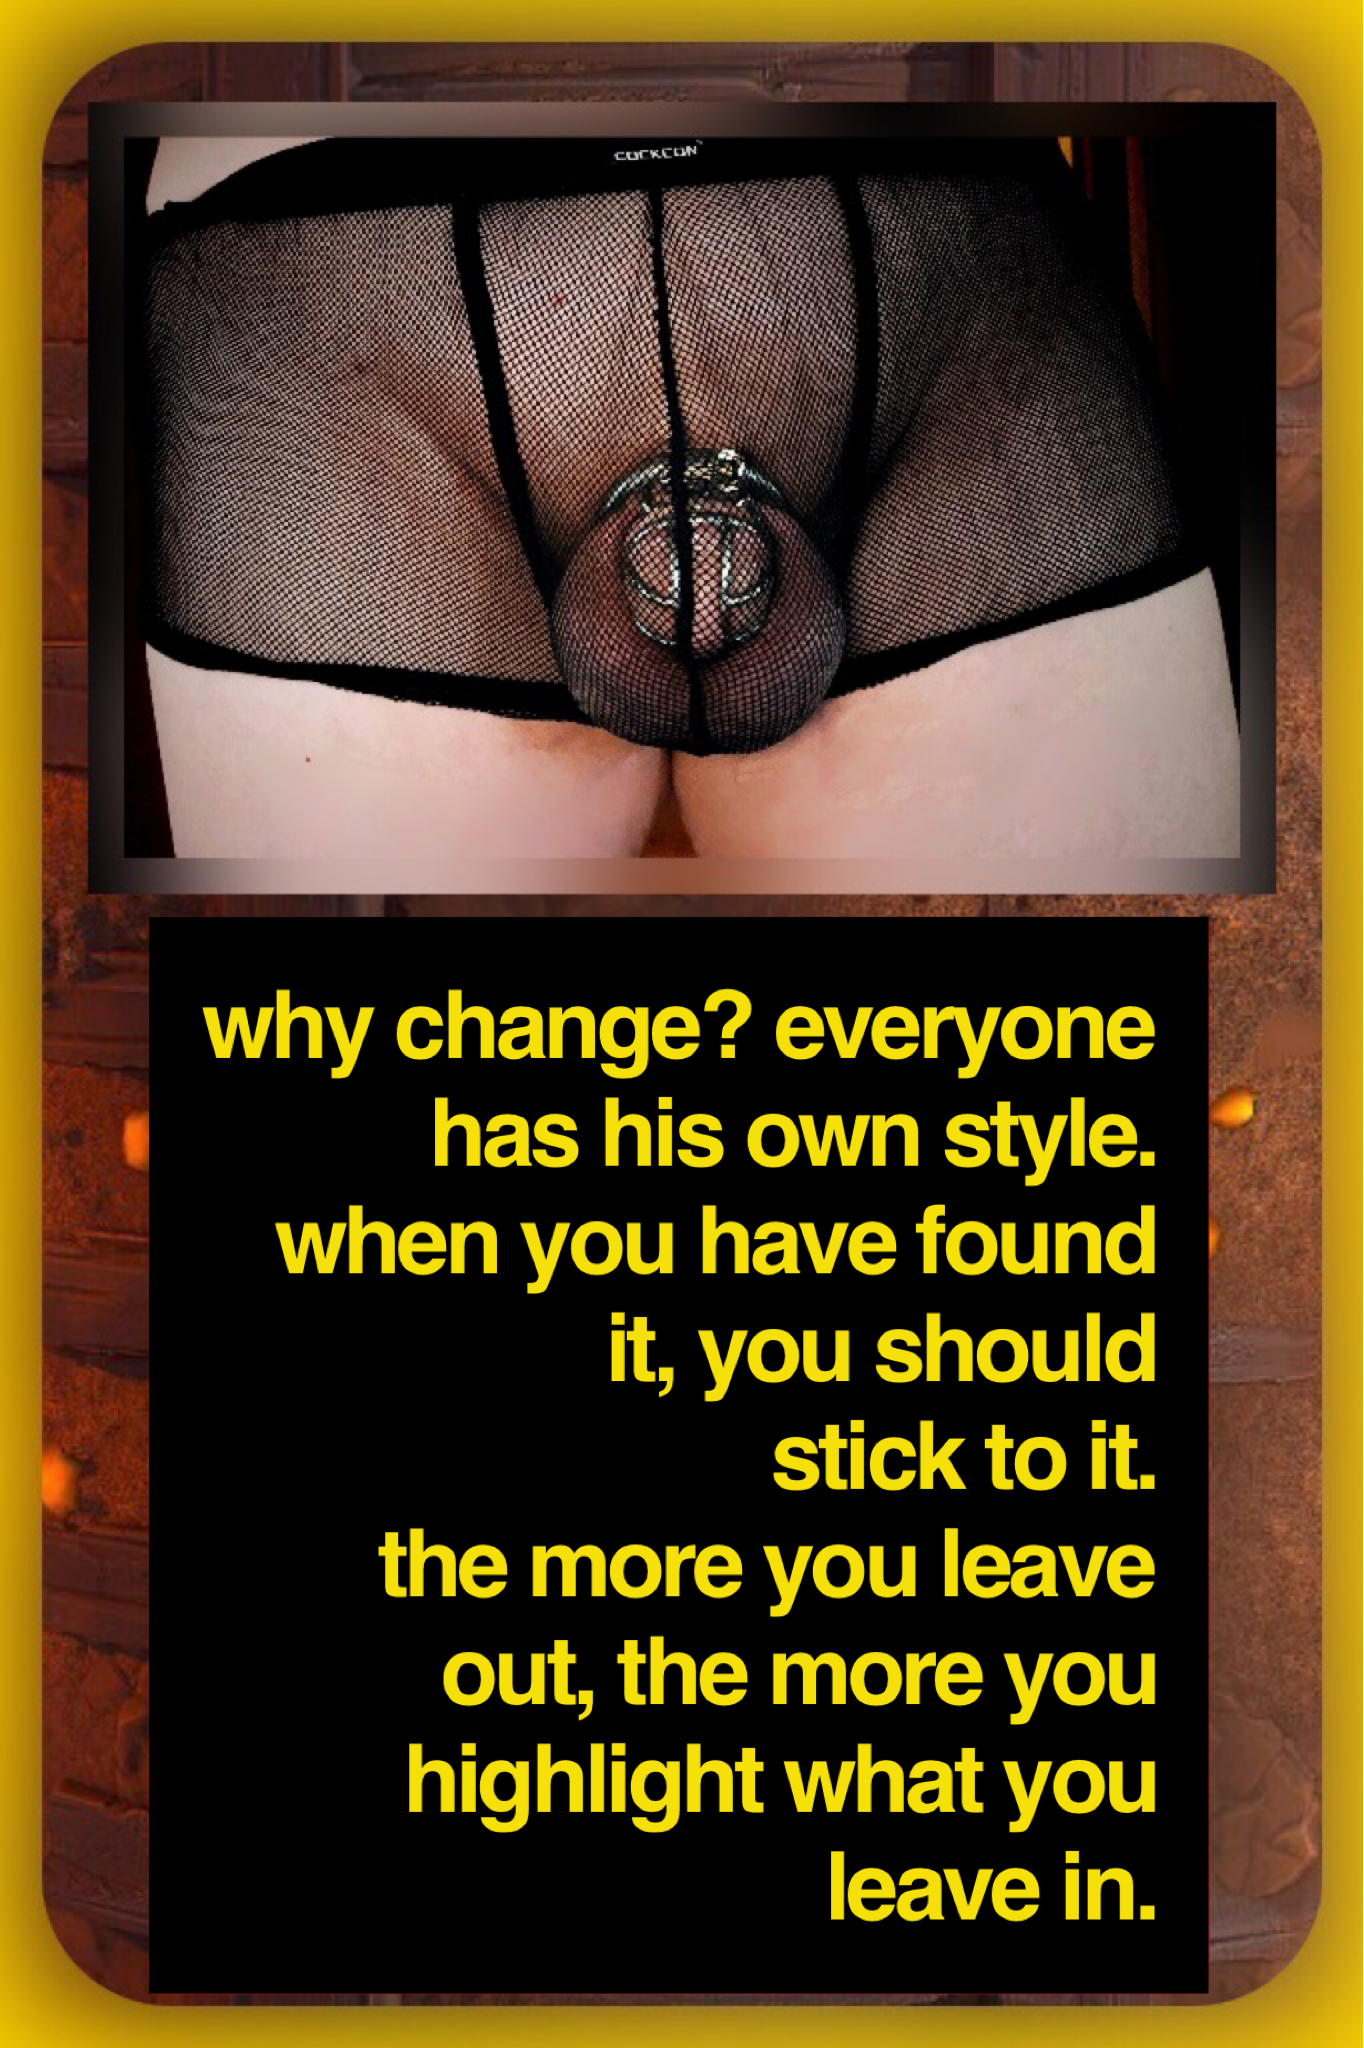 Photo by TGOC with the username @TheGuildofChastity,  June 16, 2019 at 11:16 AM. The post is about the topic The Guild of Chastity